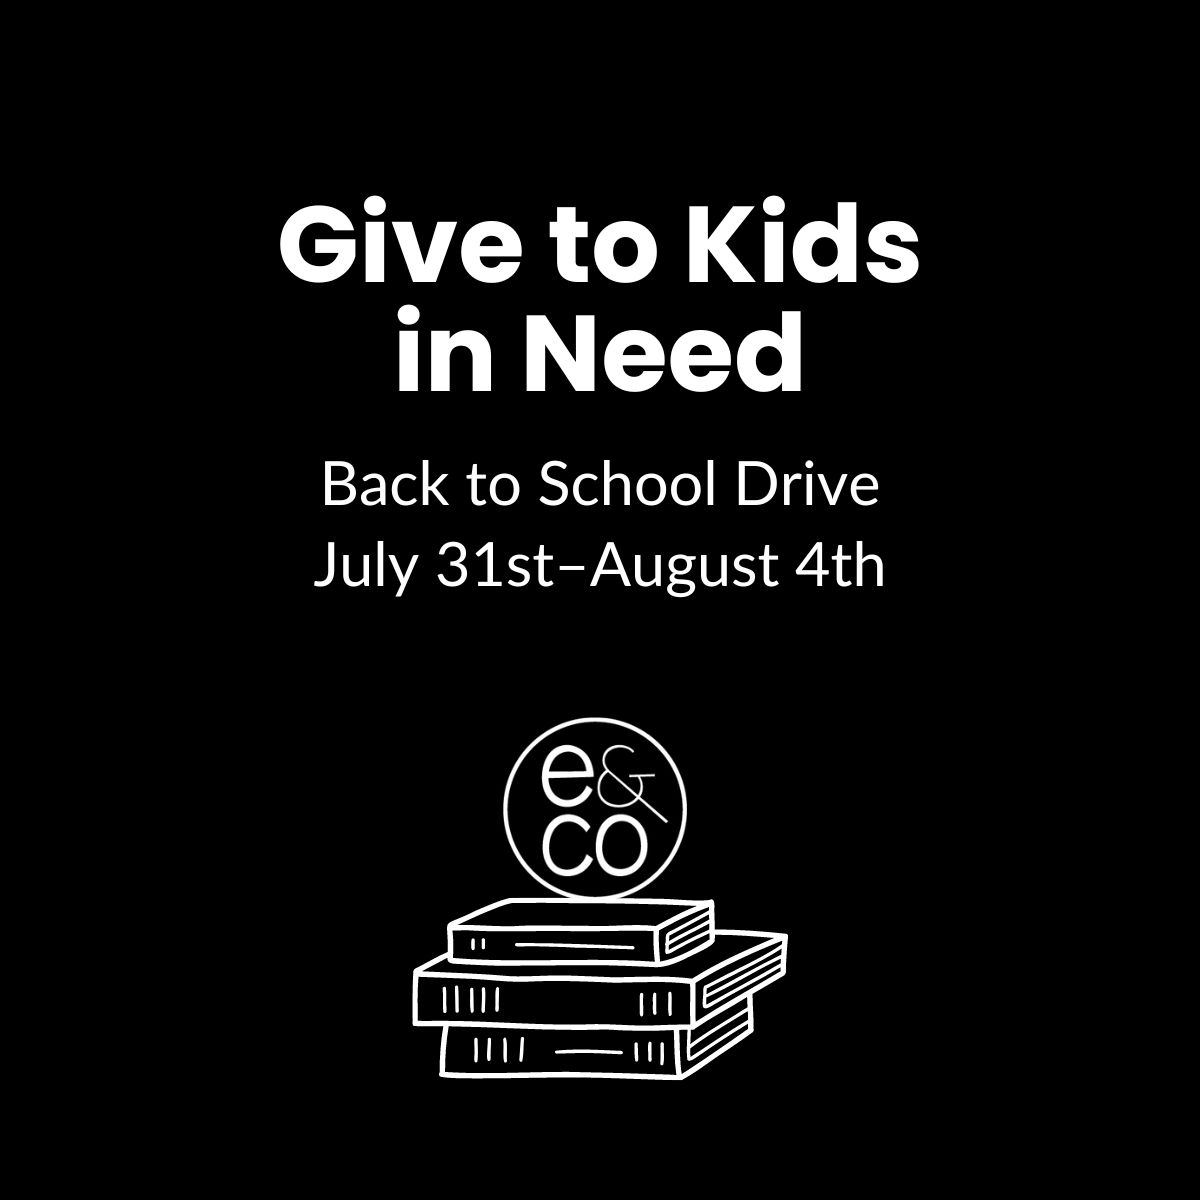 Downtown St. Petersburg’s ‘Evolve & Co’ is Collecting Supplies for Maximo Elementary School Students